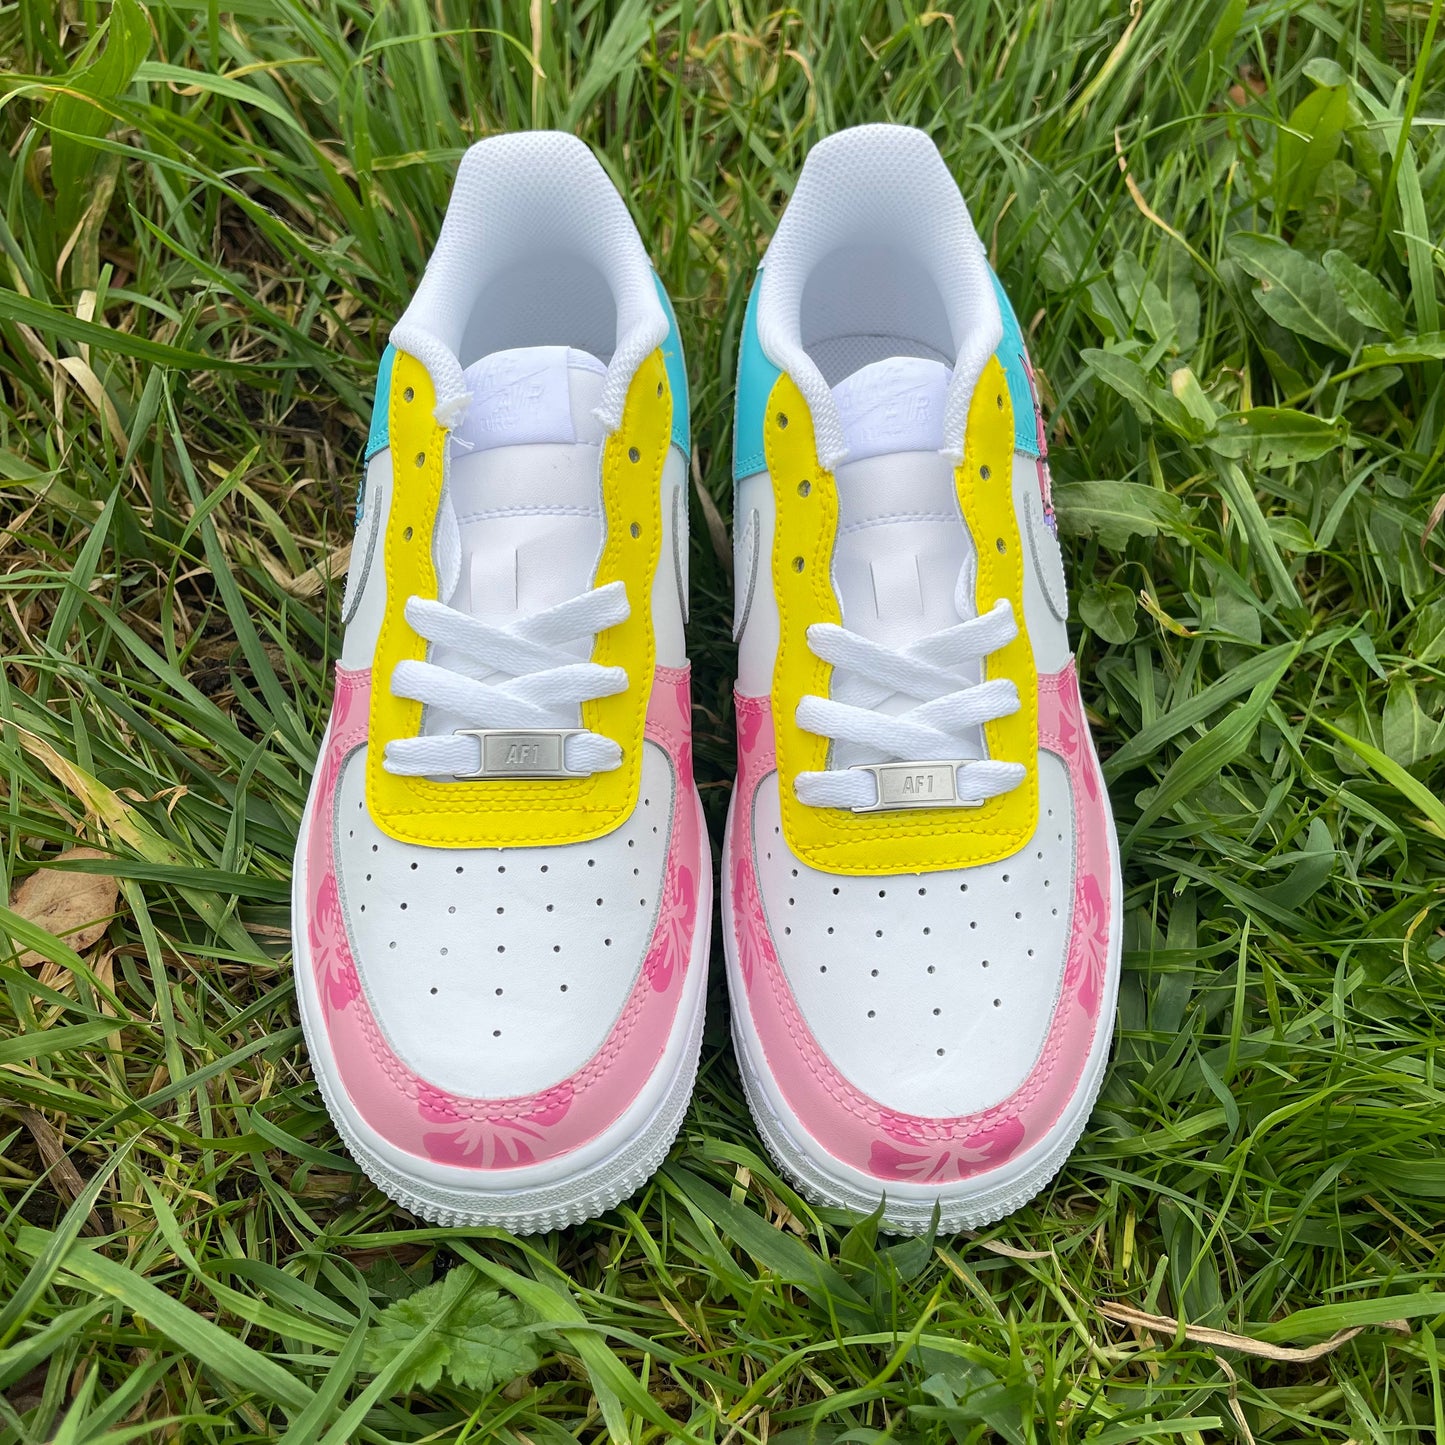 Custom AIR FORCE 1 - Stitch (turqouise/pink)